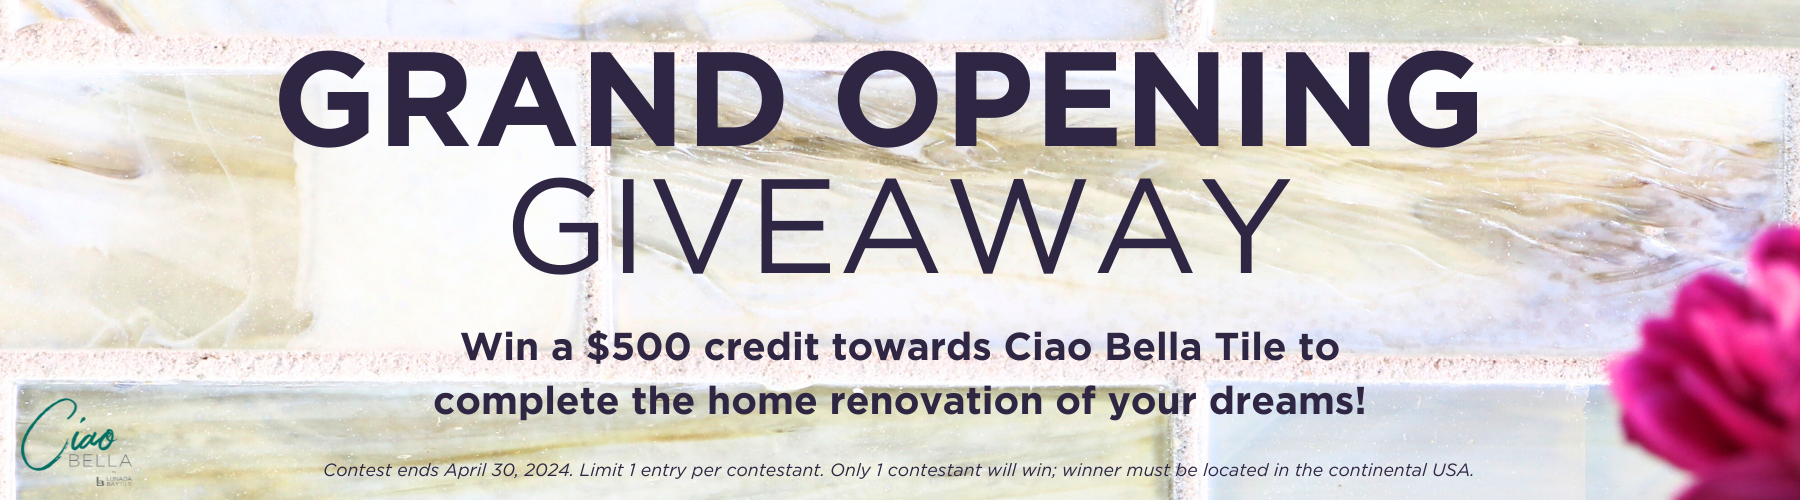 GRAND OPENING GIVEAWAY | CIAO BELLA